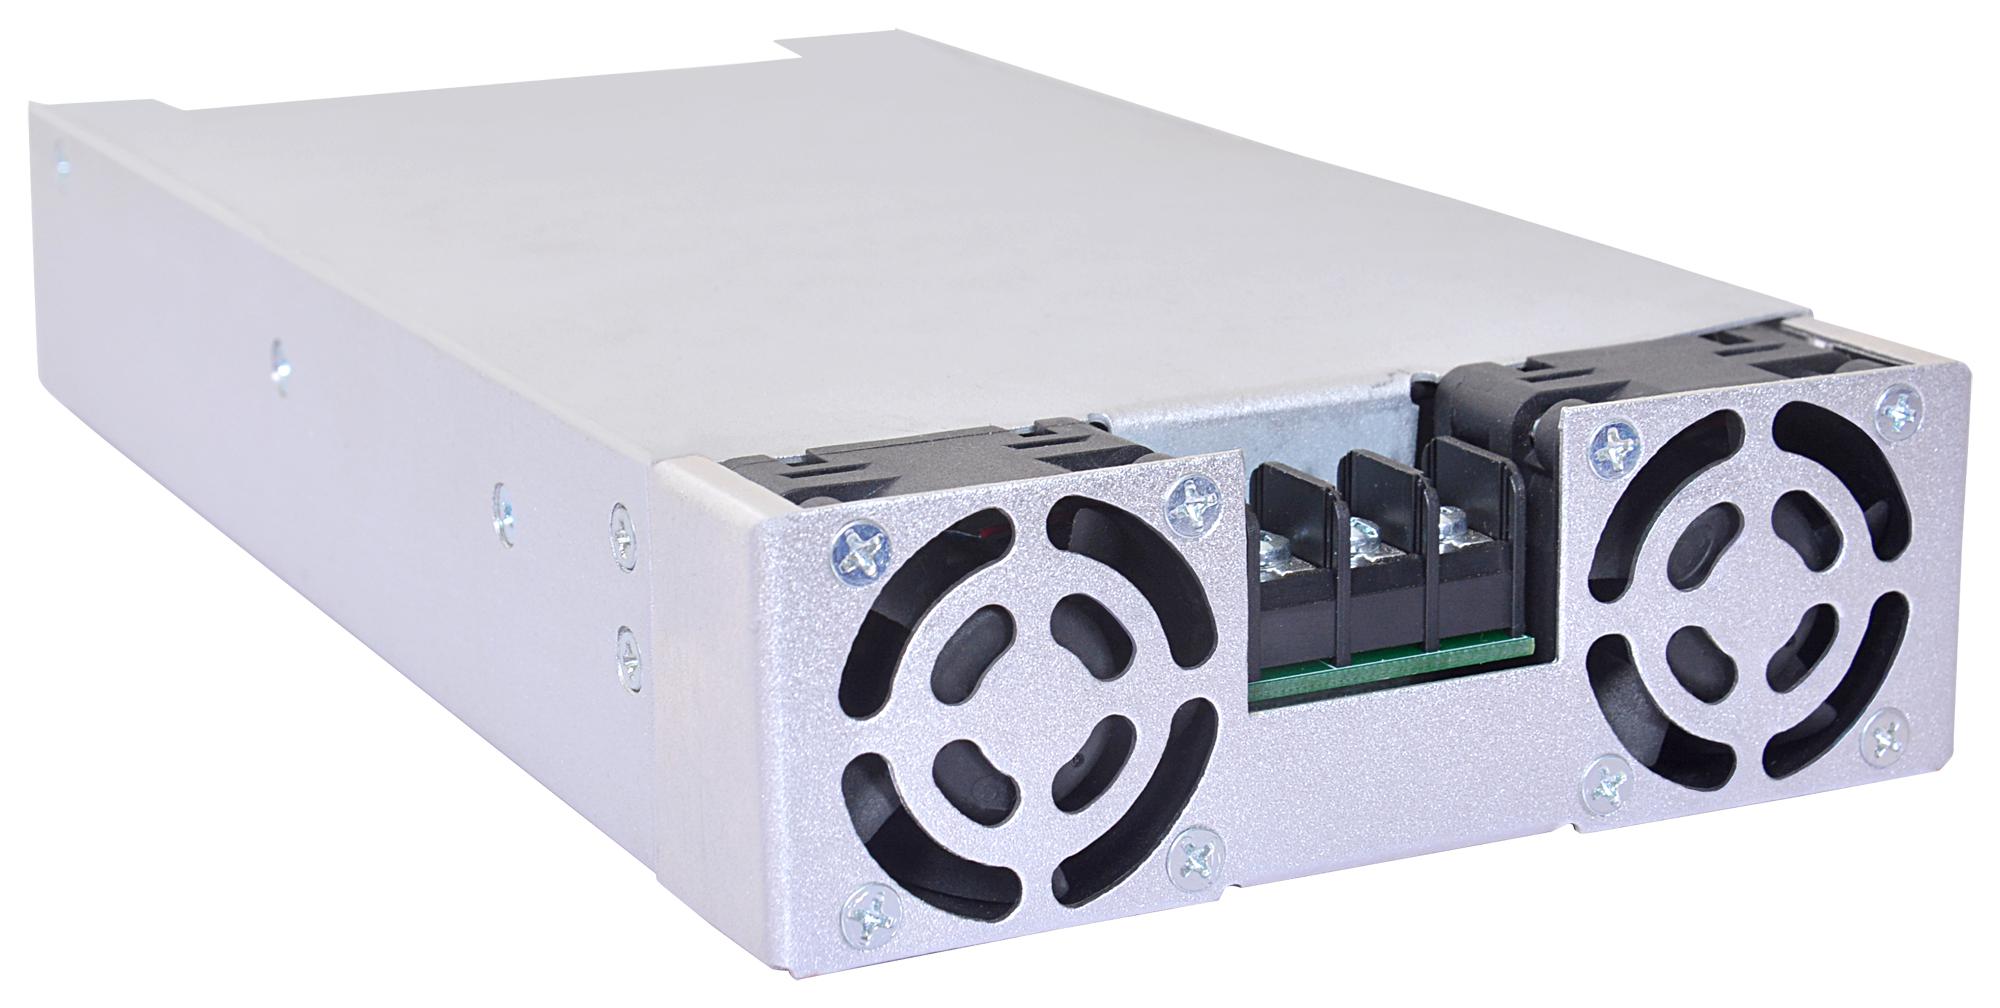 MBE1000-1T24 POWER SUPPLY, AC-DC, 24V, 41.66A BEL POWER SOLUTIONS